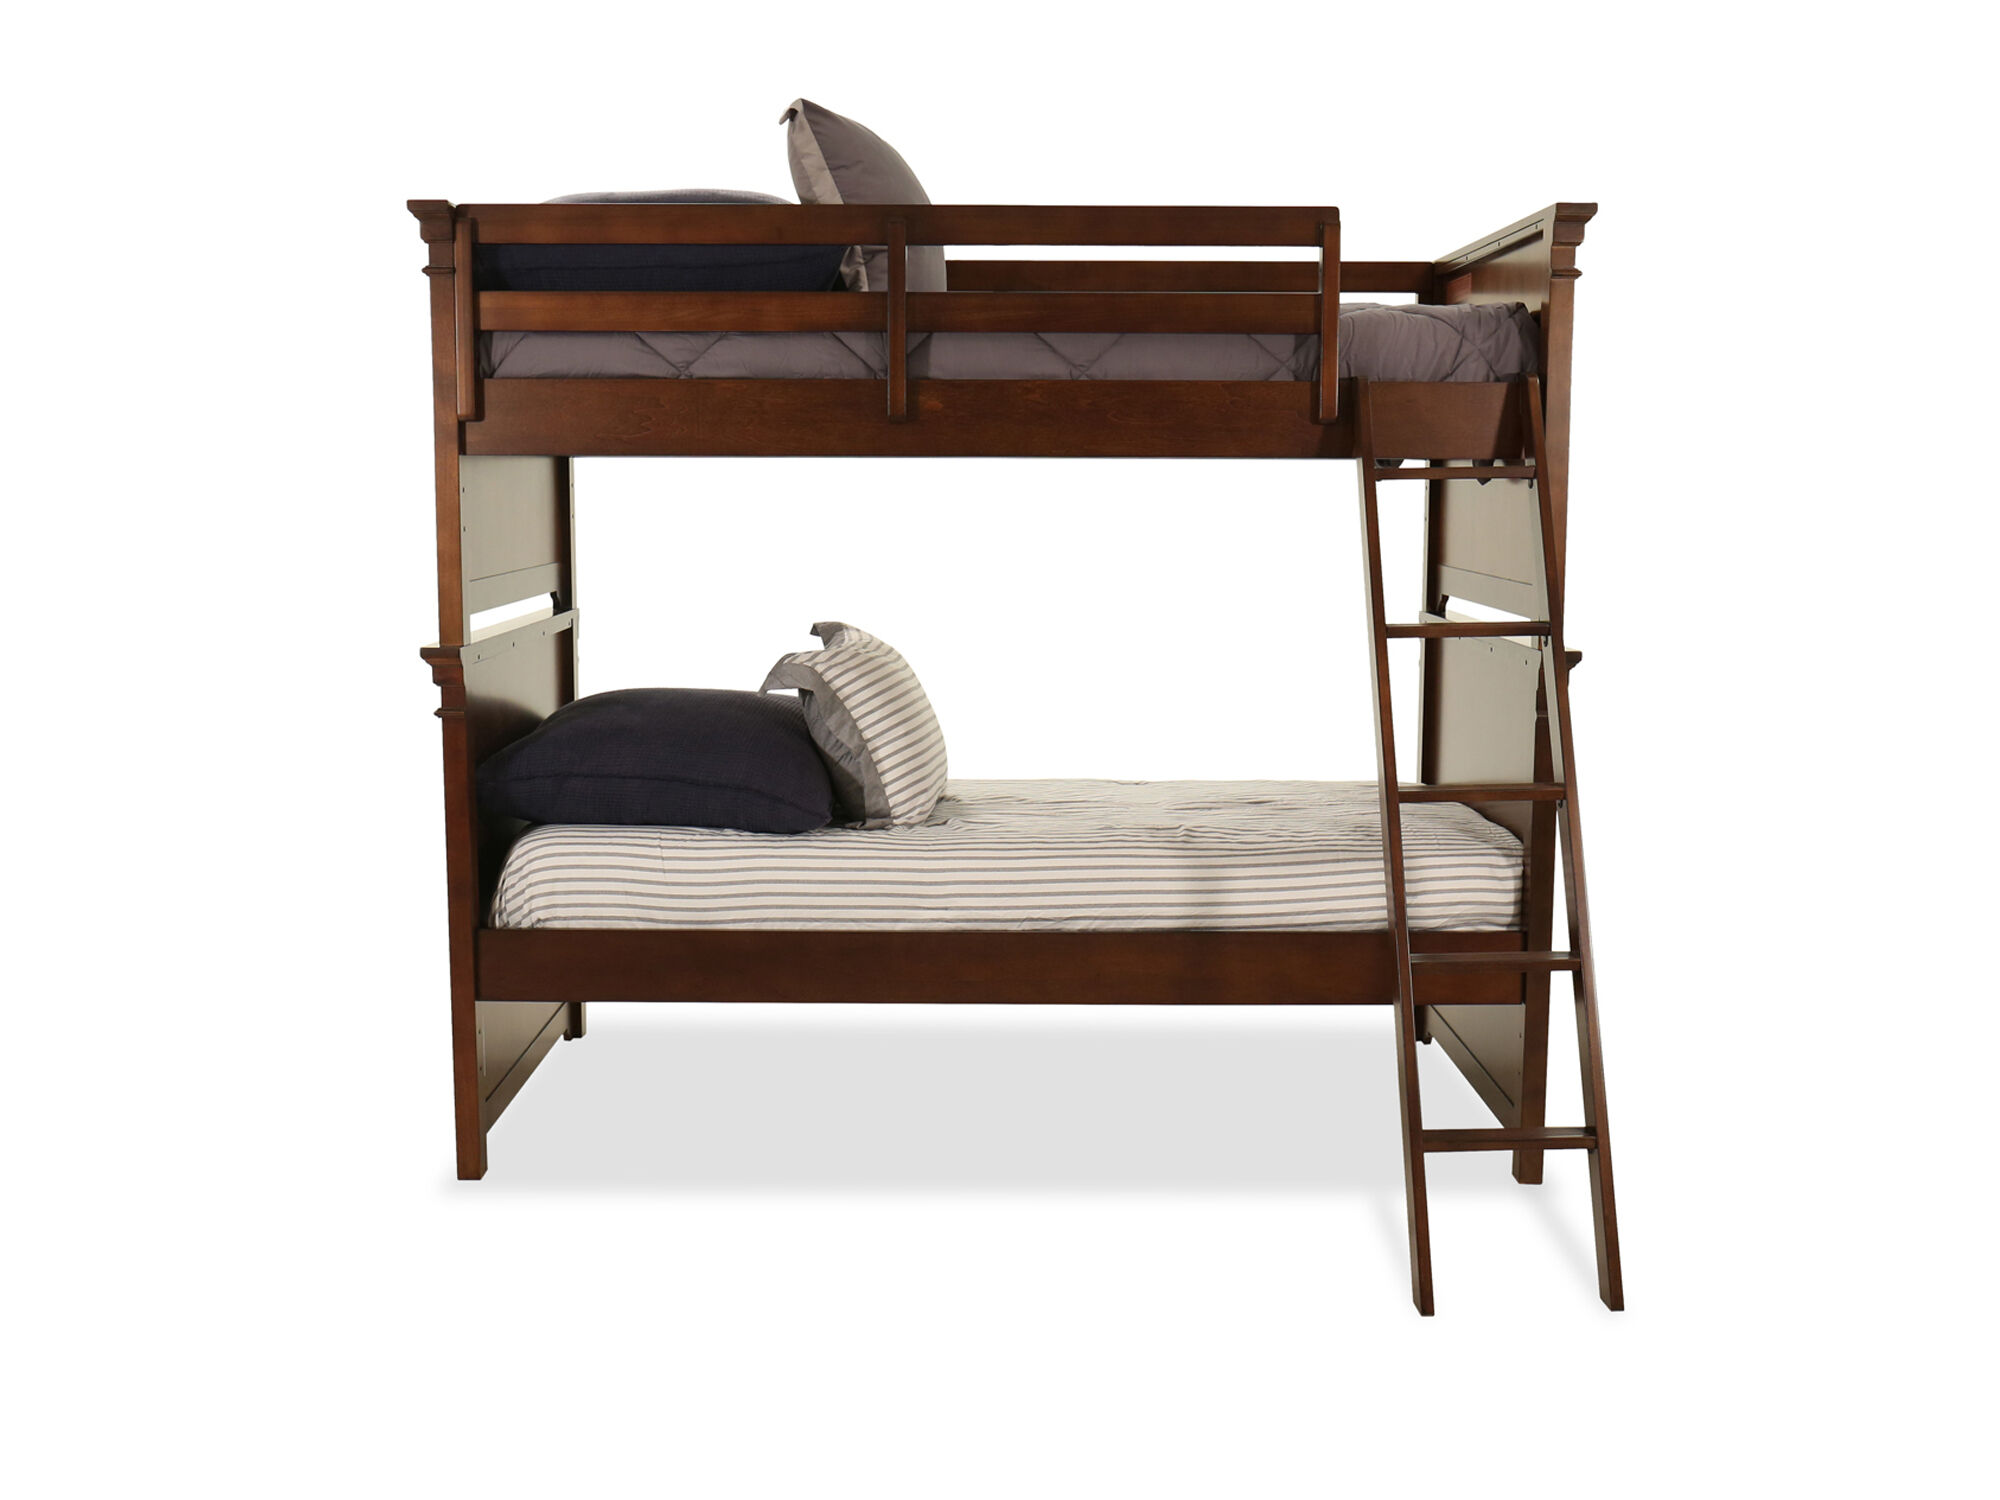 mathis brothers twin beds